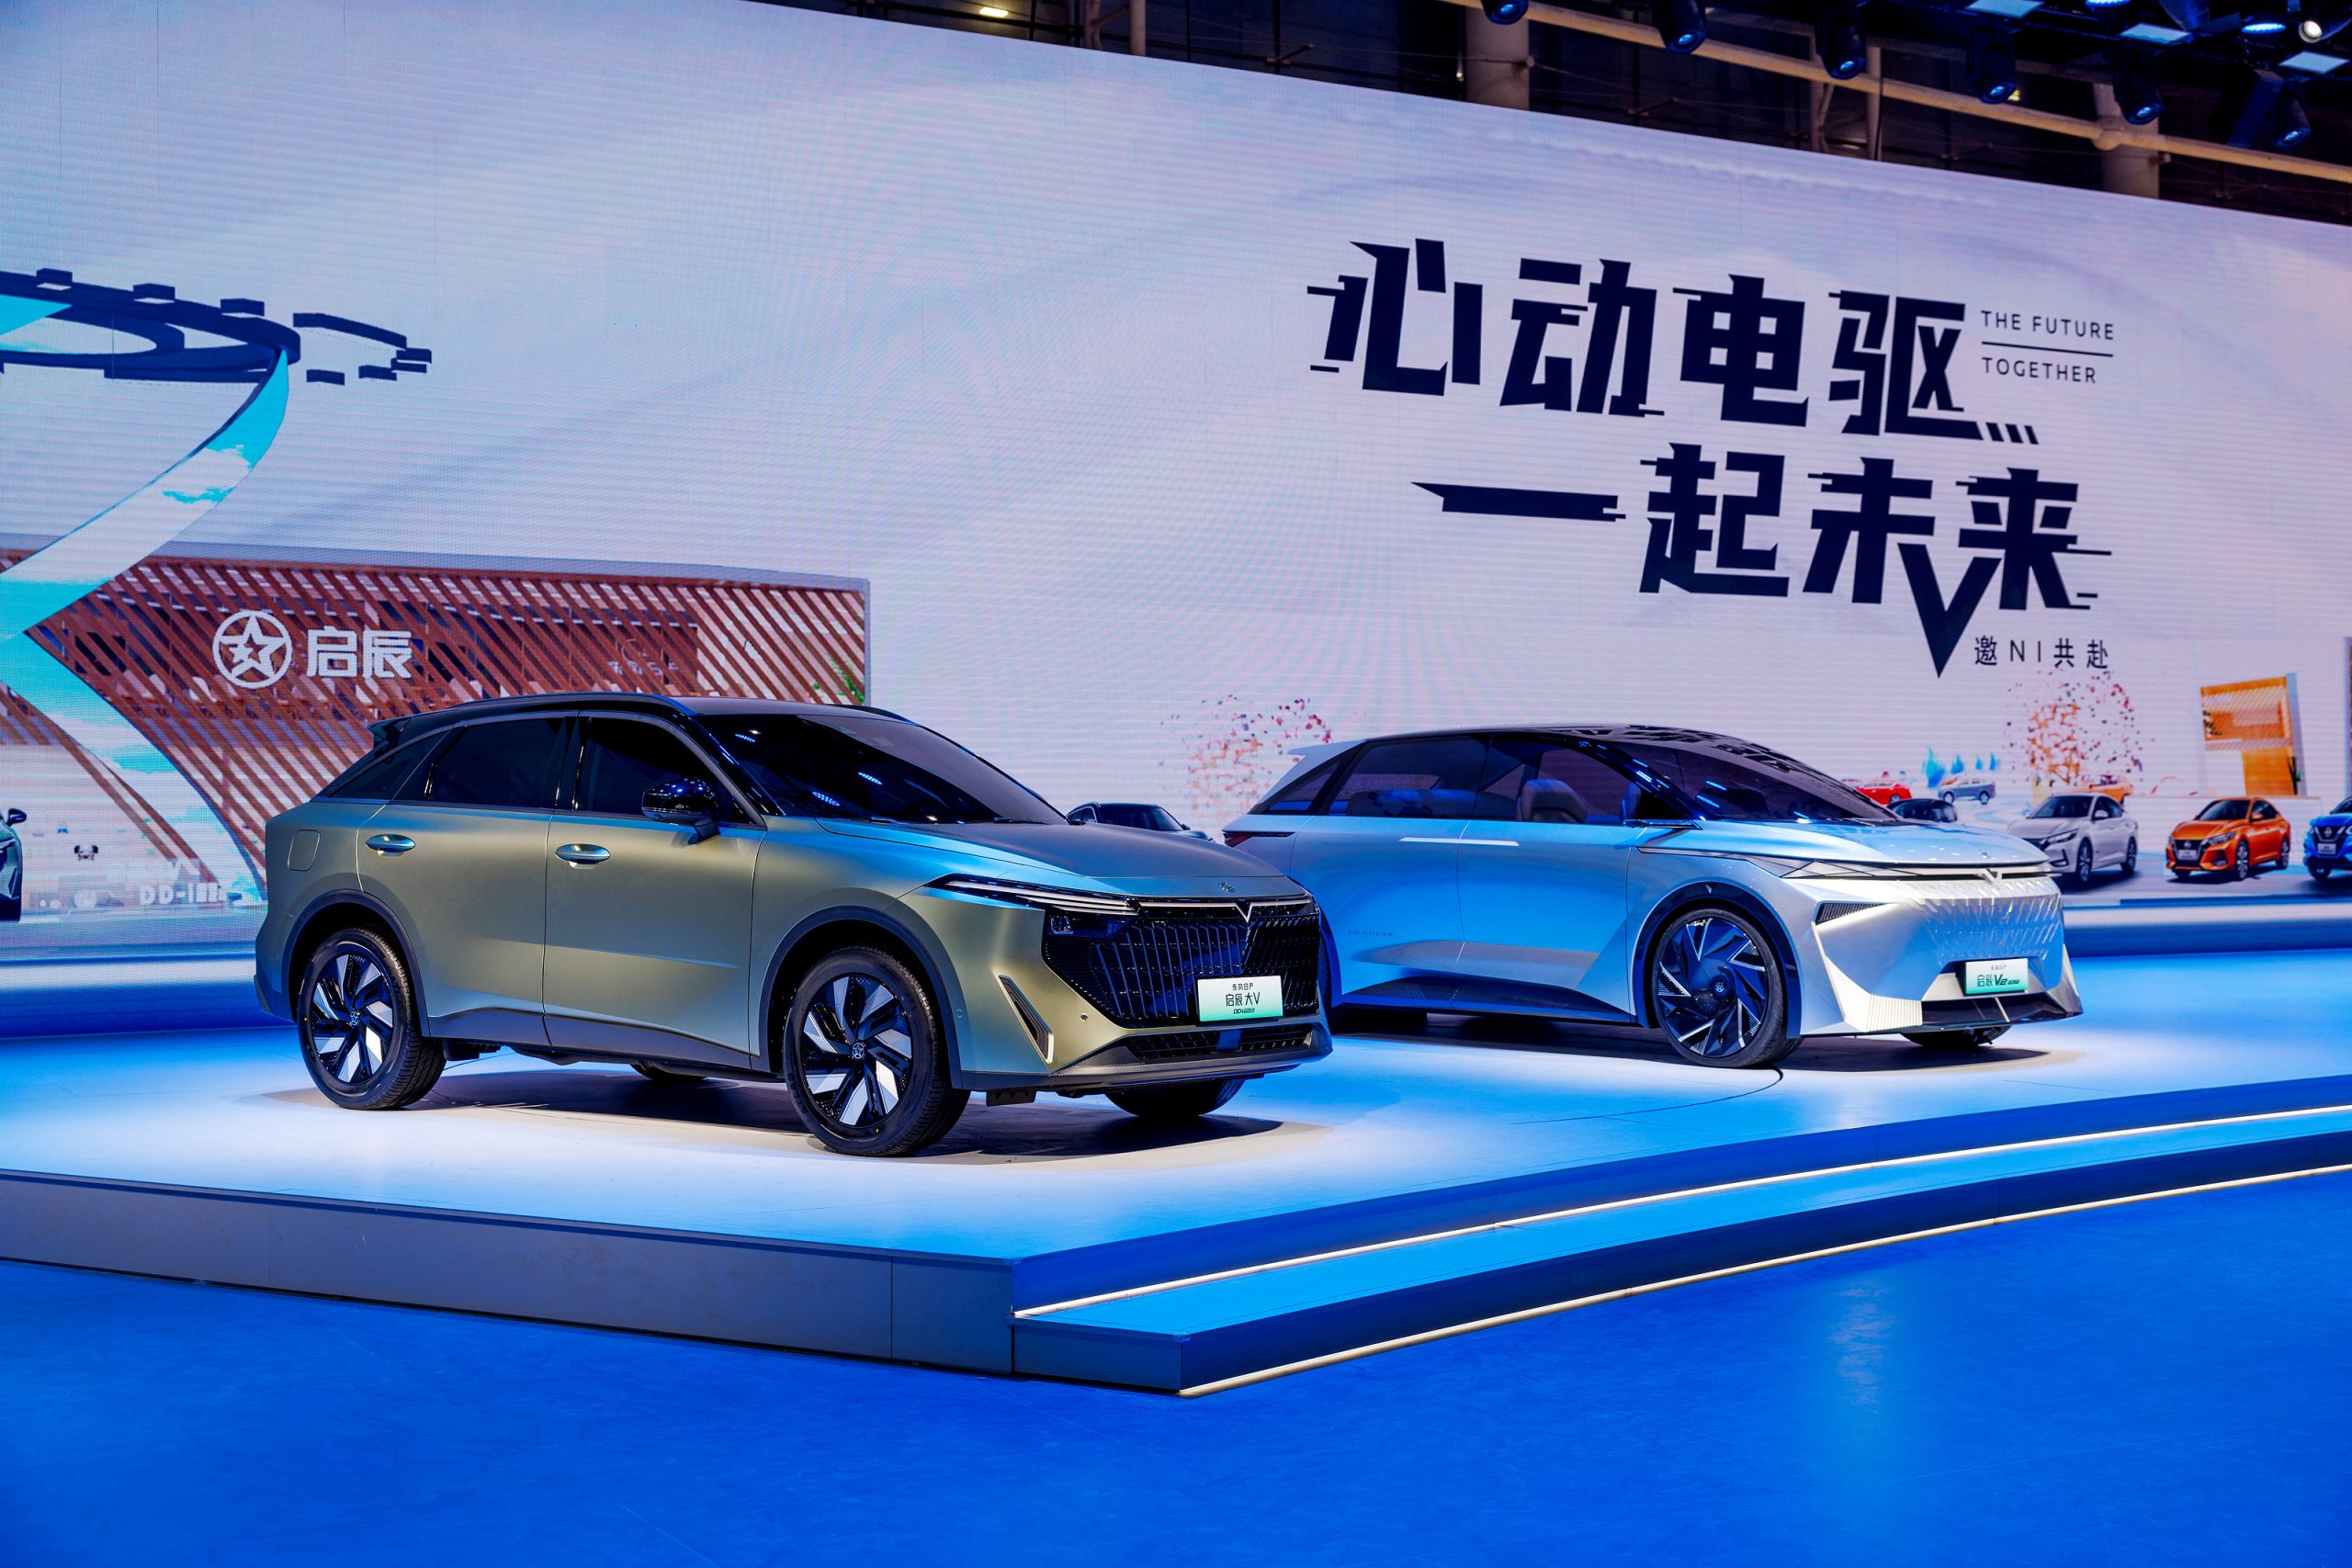 2022 Guangzhou Auto Show: Chery showcases two new cars with hybrid and pure electric options.